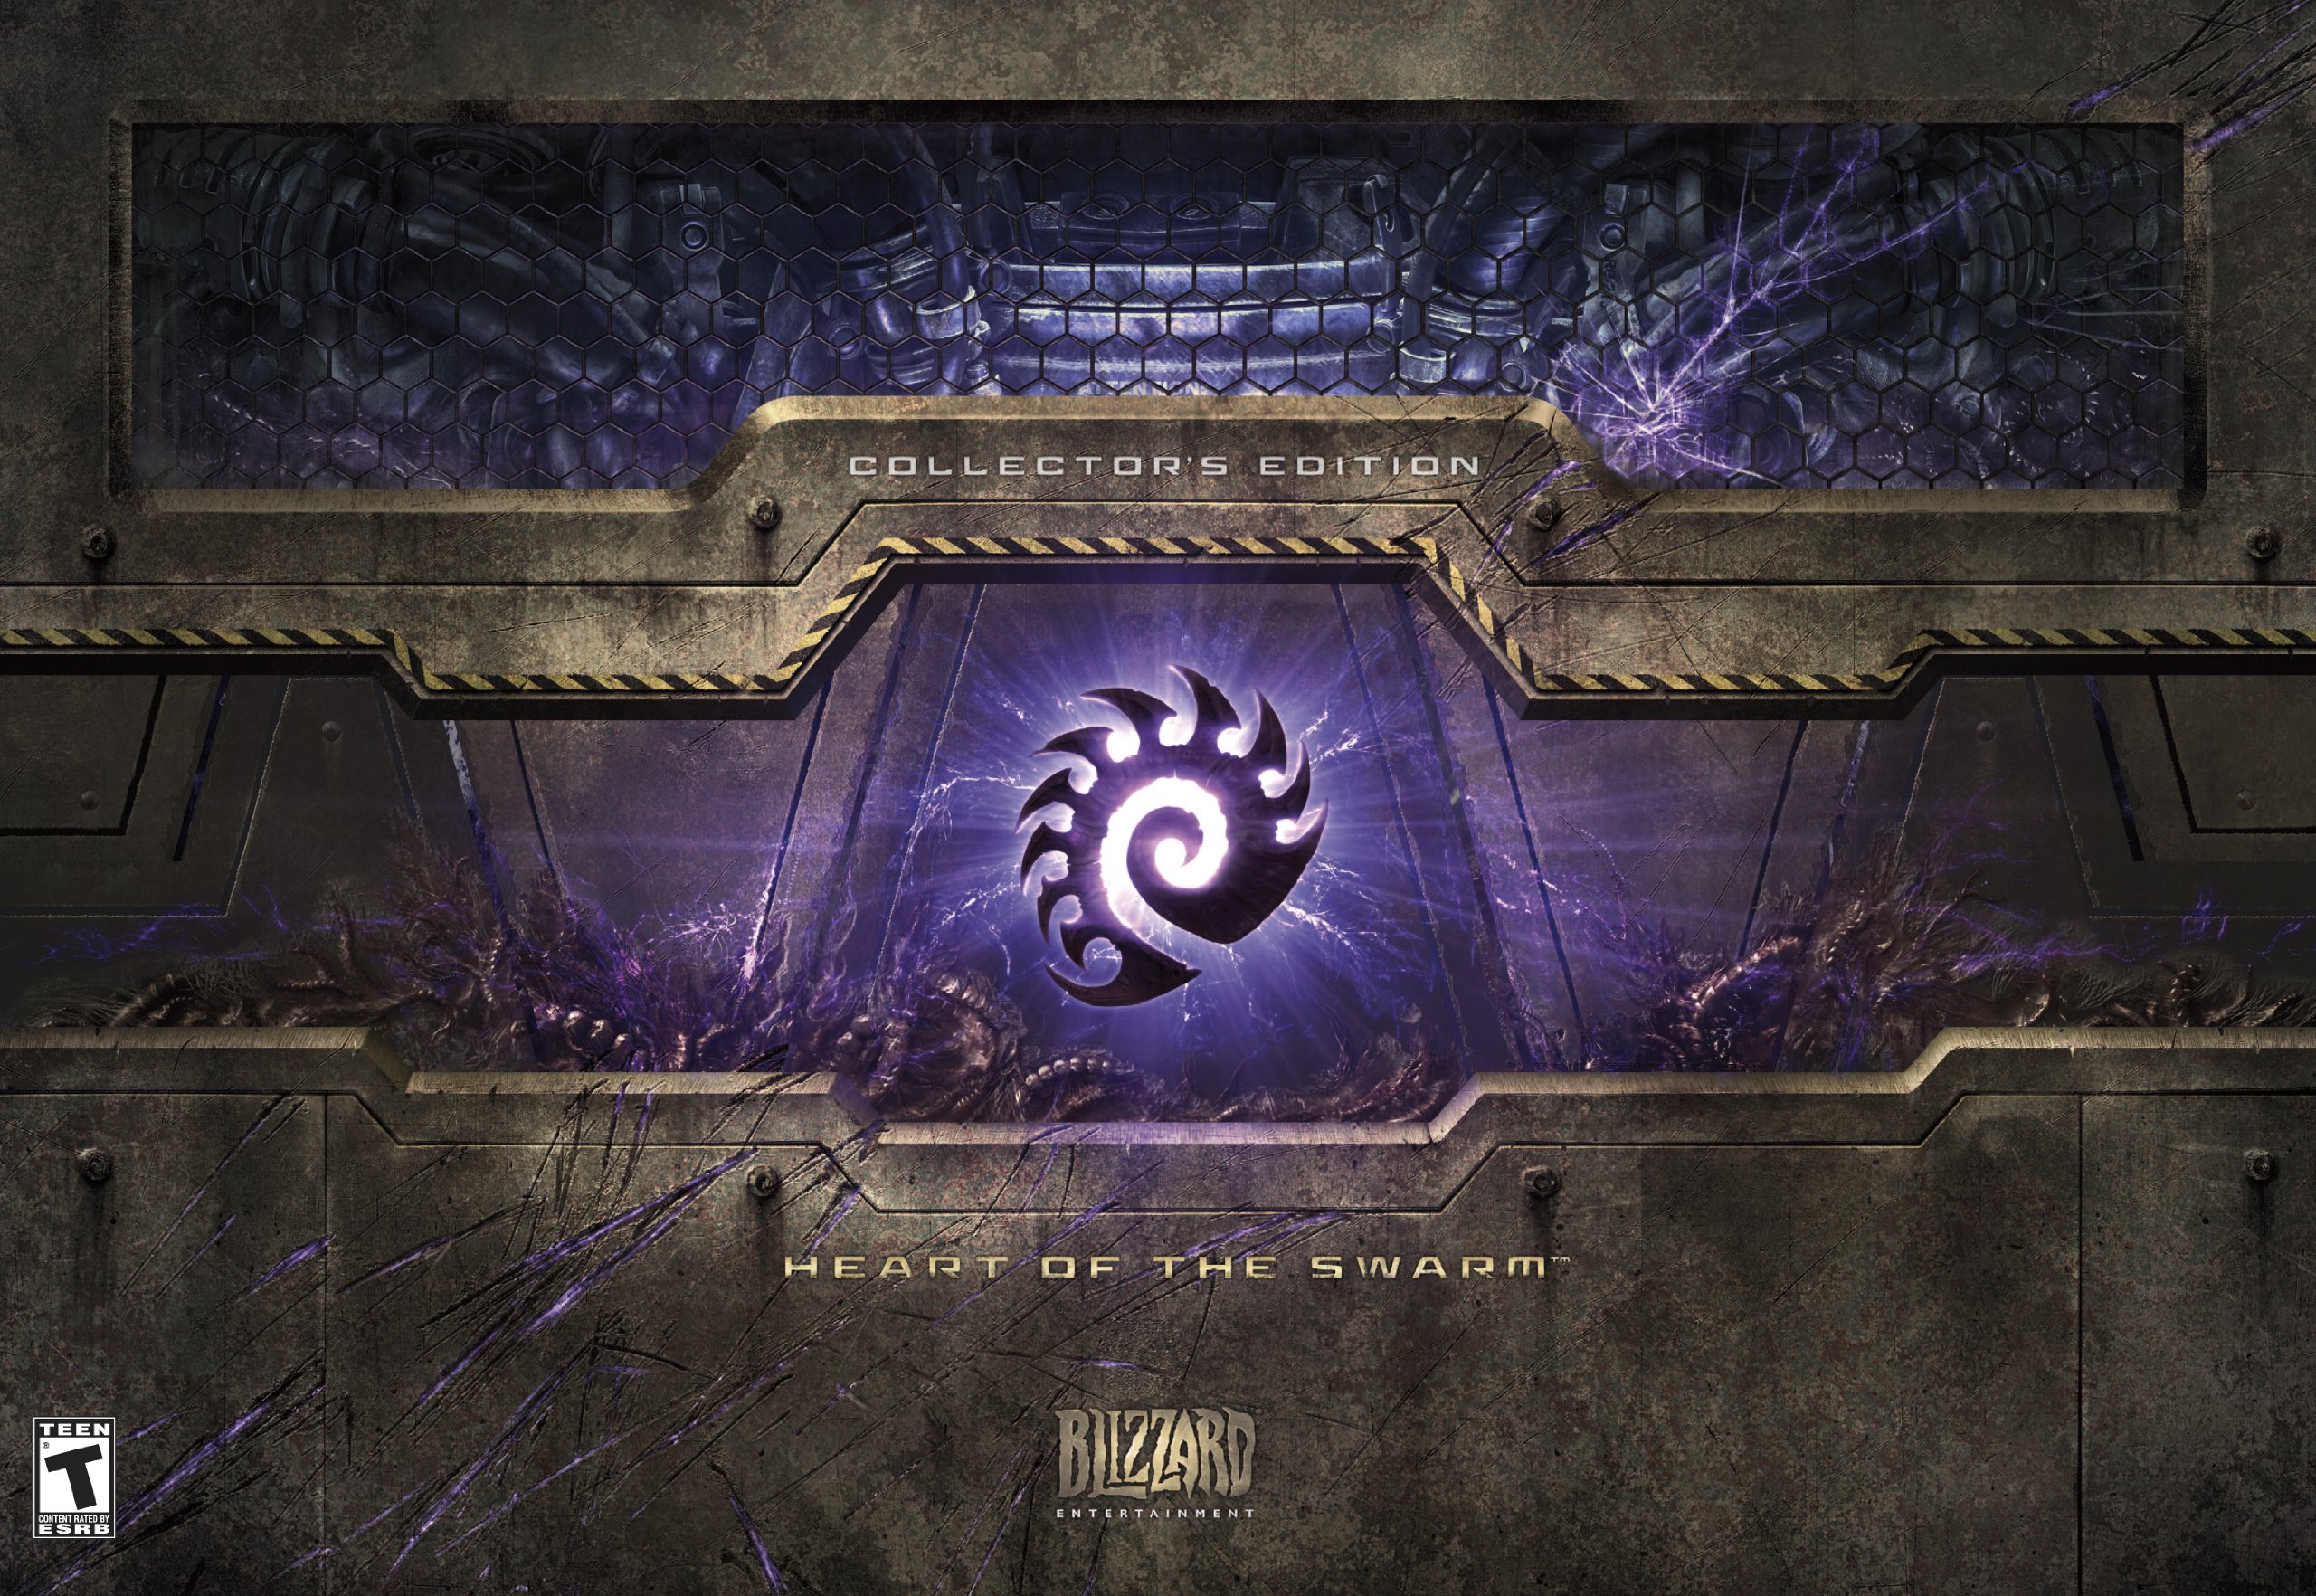 Starcraft 2 Heart Of The Swarm